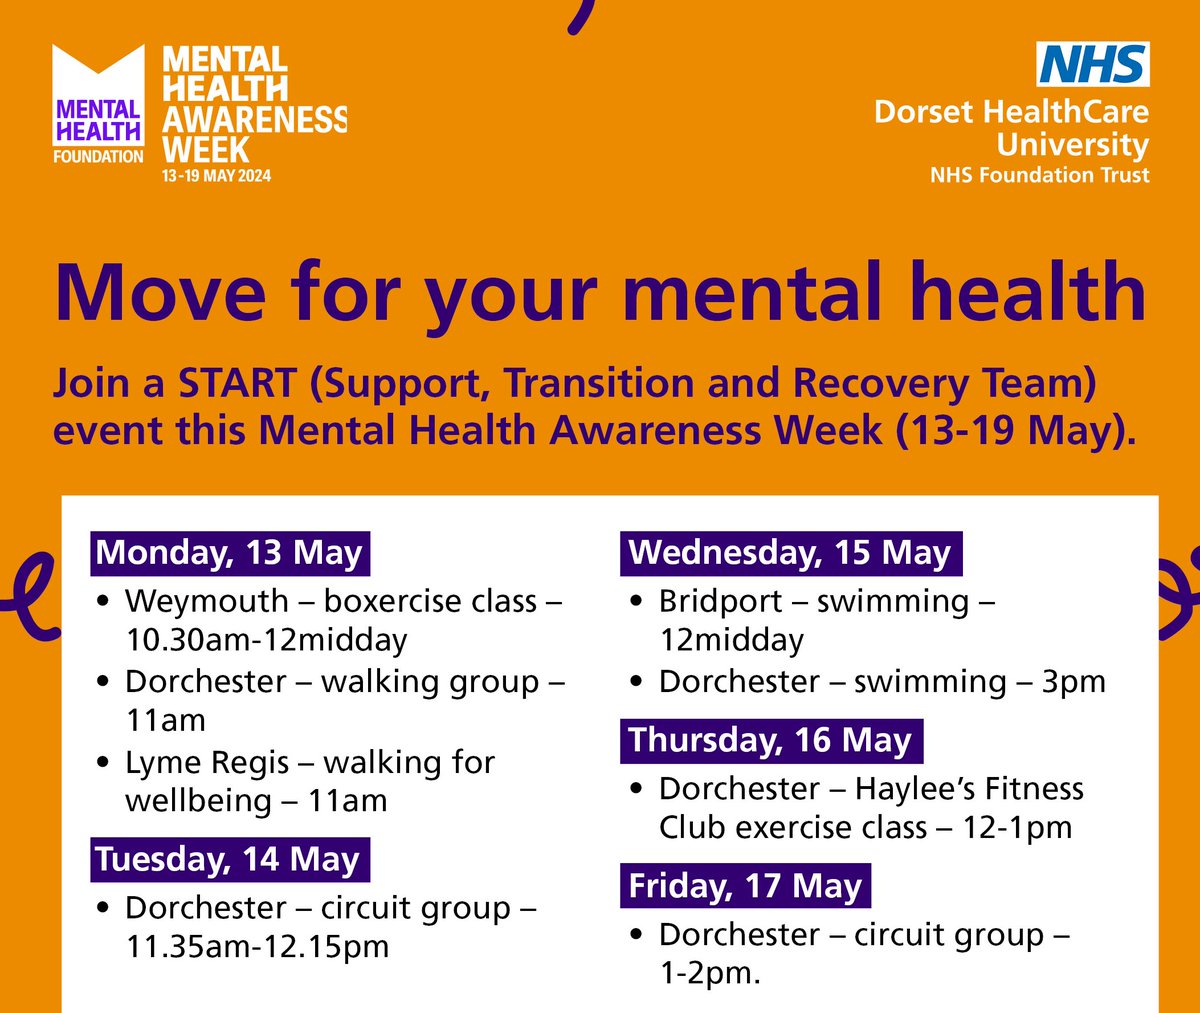 Next week is #MentalHealthAwarenessWeek (13-19 May) and we are encouraging everyone to get moving for their mental health. Try out one of our START (Support, Transition and Recovery Team) activities. Contact the team to attend: dhc.start@nhs.net #MomentsForMovement #MHAW